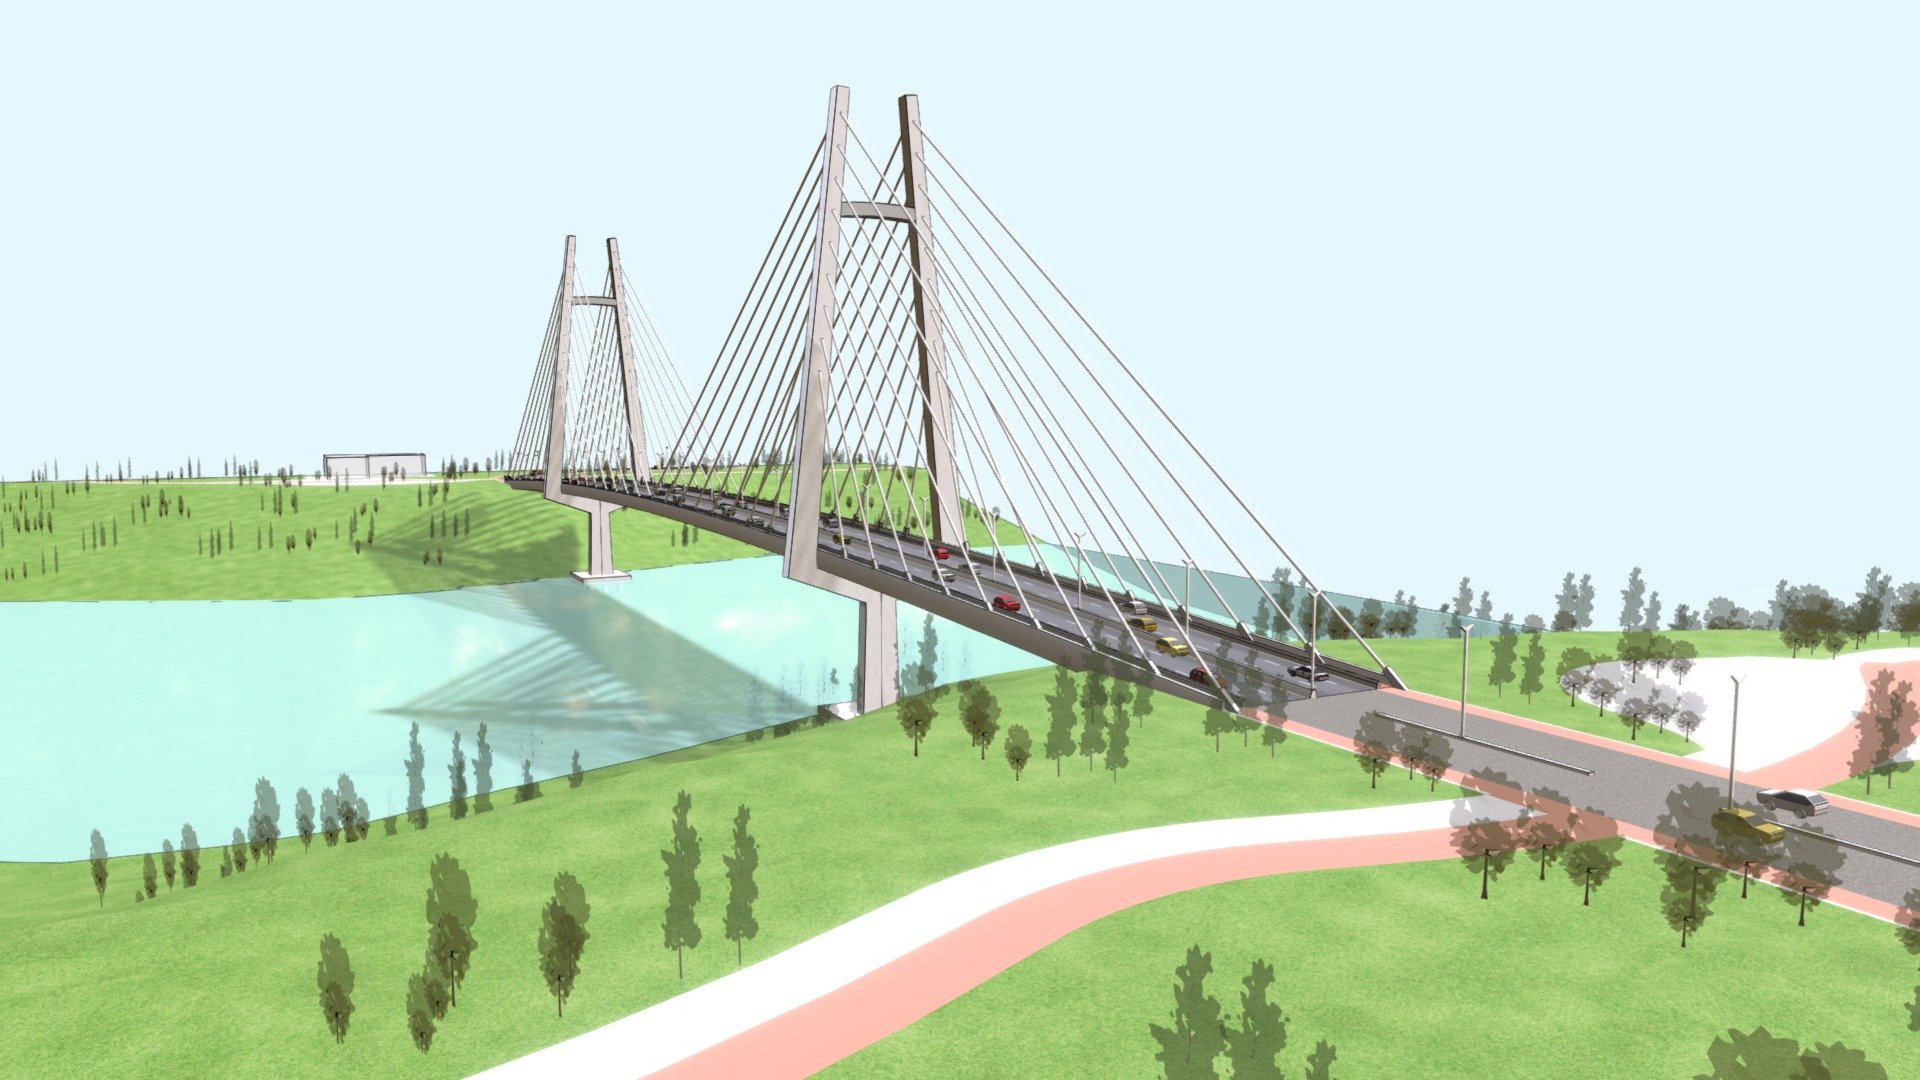 High-quality 3D model of a cable-stayed-bridge. Modelo 3D de alta qualidade de uma ponte estaiada. If you want more projects like that, get in touch! - Bridge - Cable-stayed-bridge - Ponte Estaiada - Buy Royalty Free 3D model by Gustavo Chagas (@lg22sc) 3d model